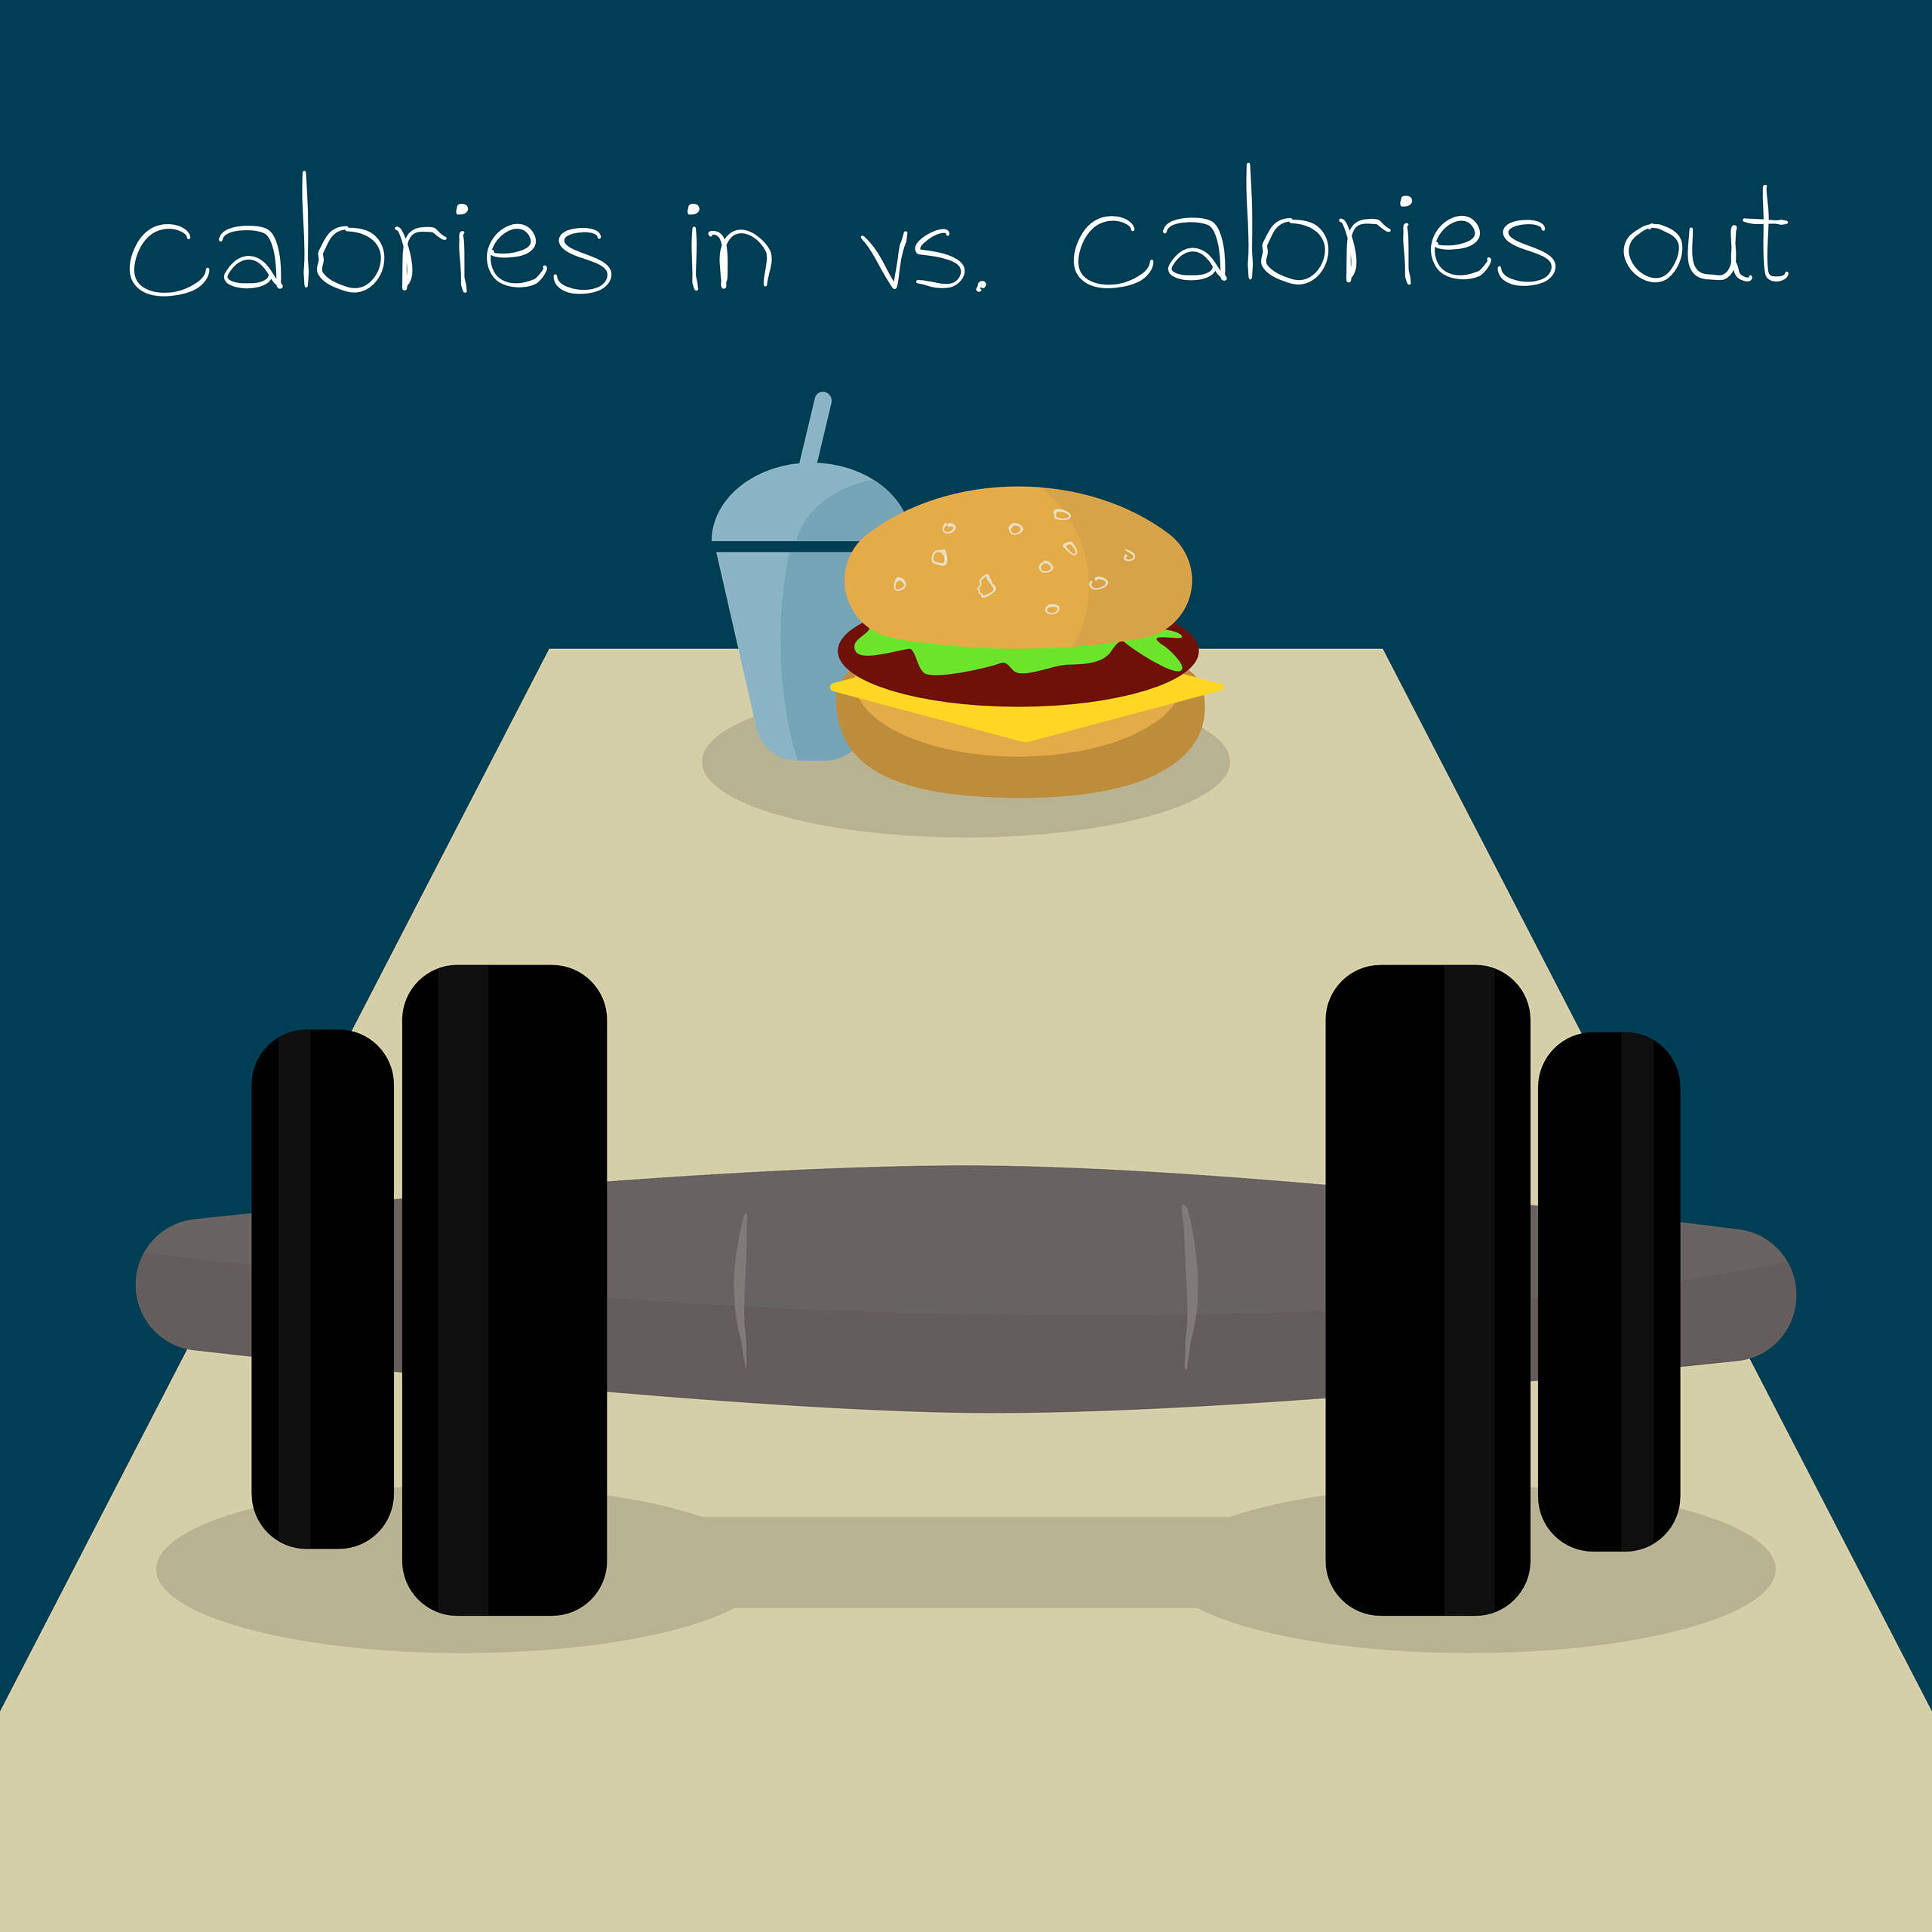 calories in vs calories out, weight loss, obesity